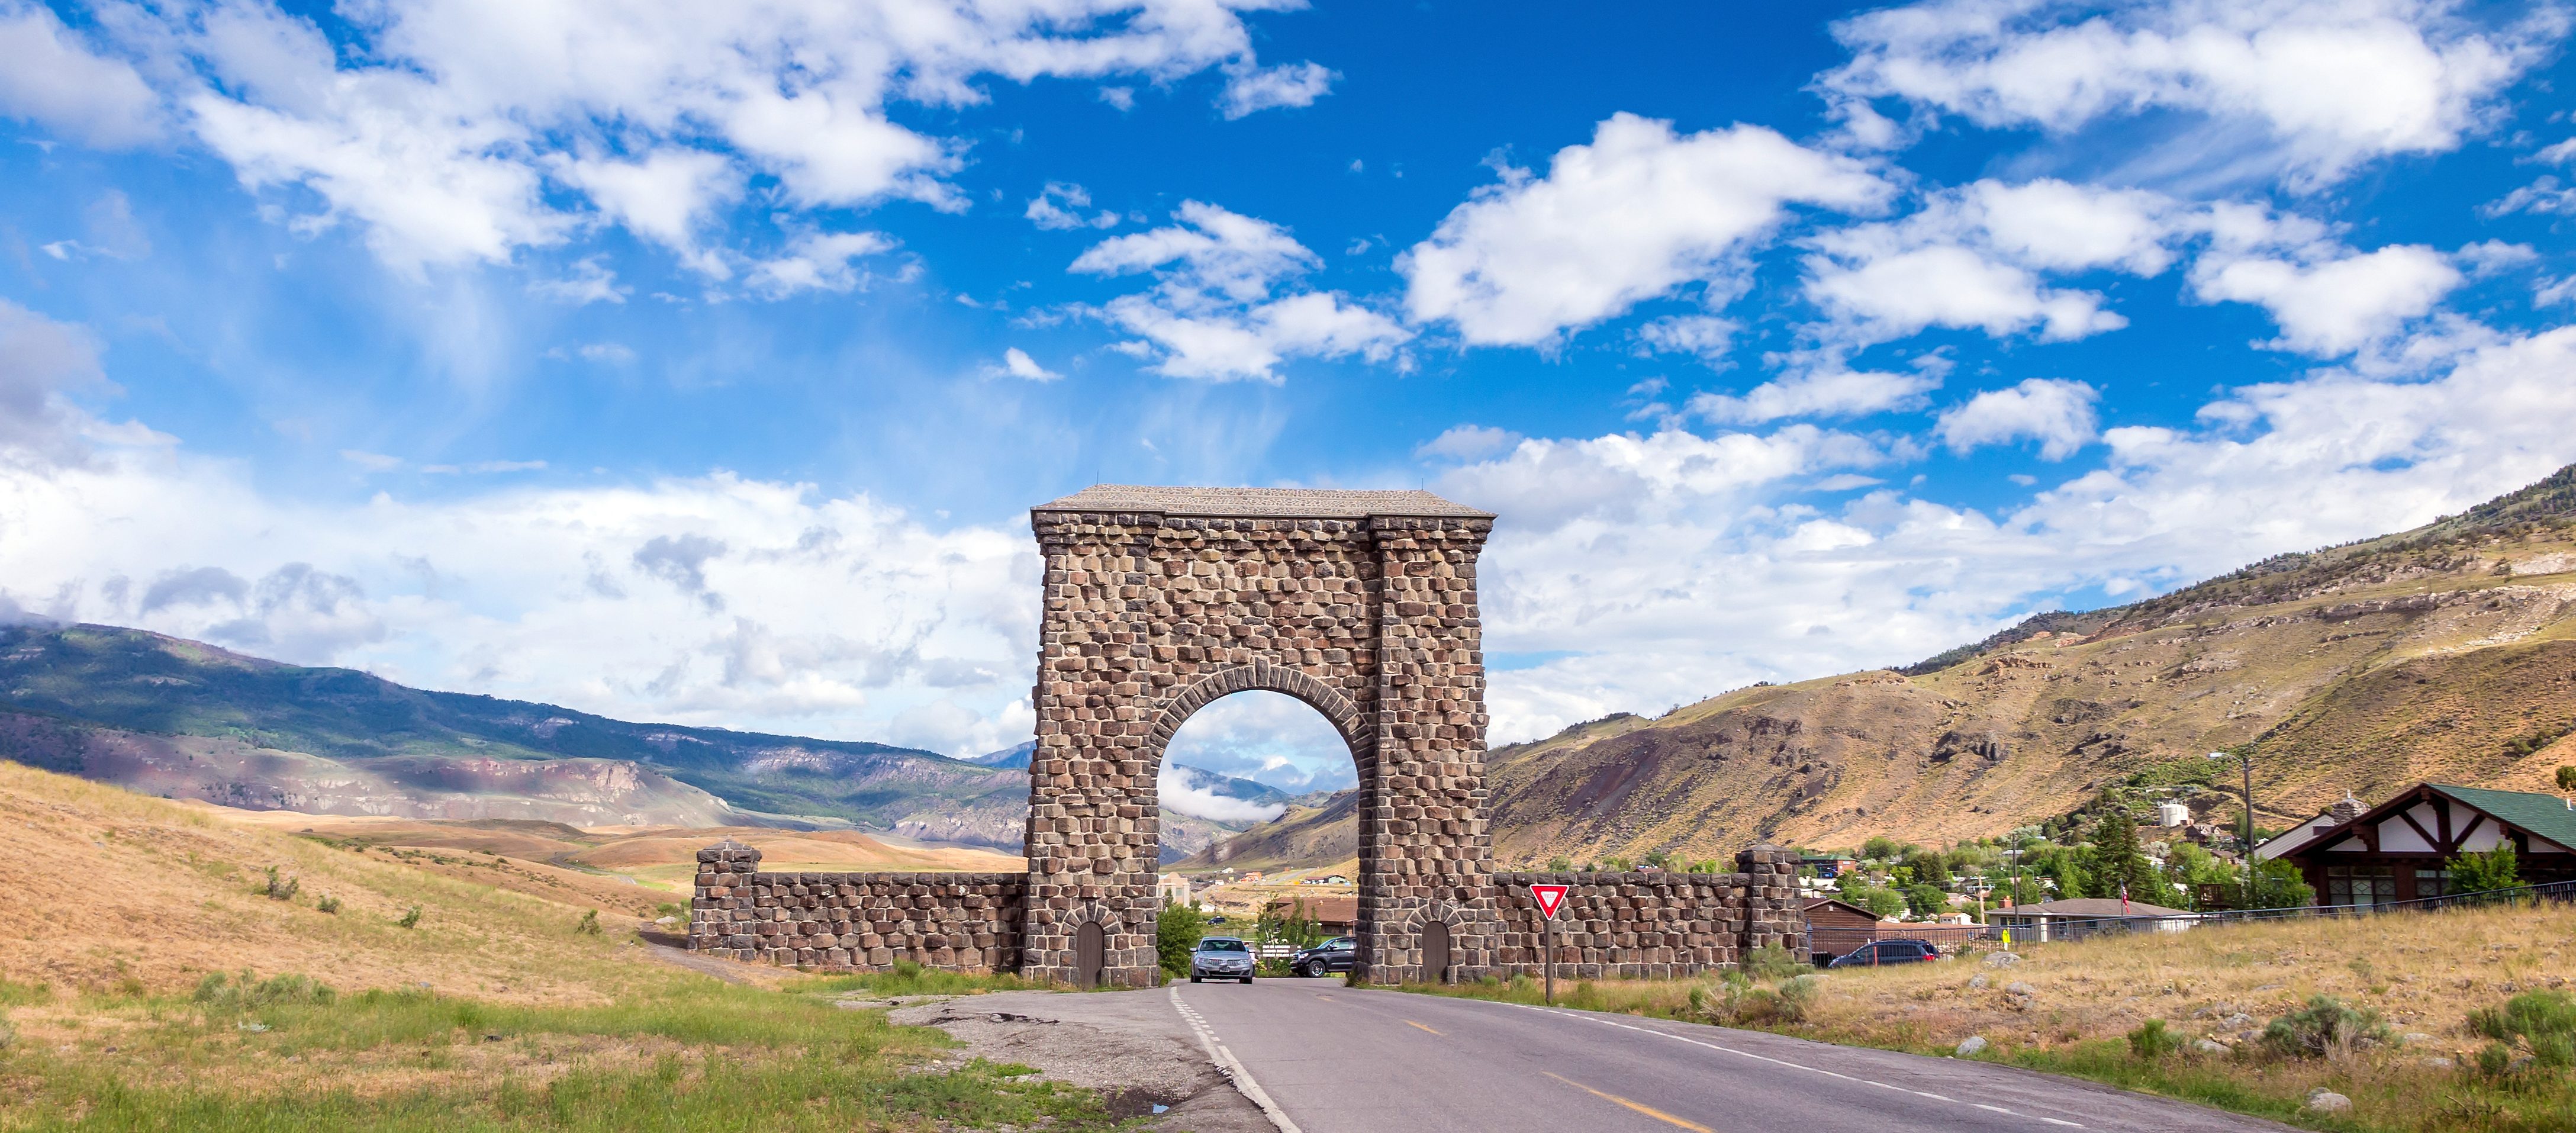 Roosevelt Arch in Gardiner, Montana. One of the entrances to Yellowstone National Park